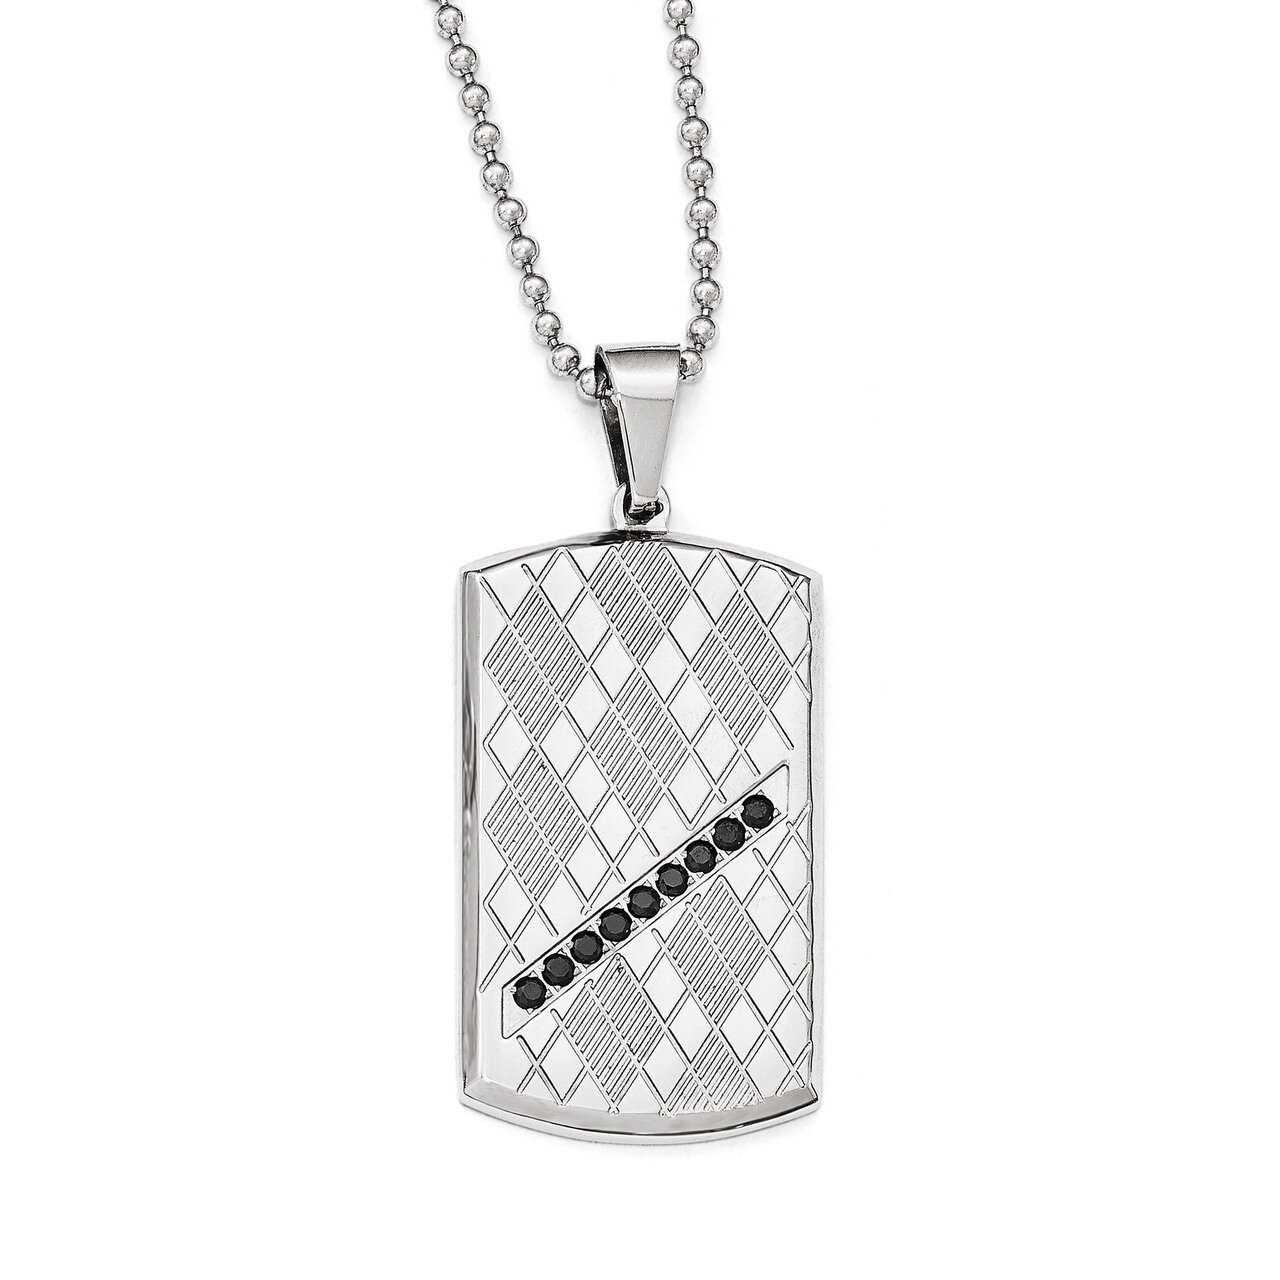 Polished & Textured Black Synthetic Diamond Dog Tag Necklace - Stainless Steel SRN1970-22